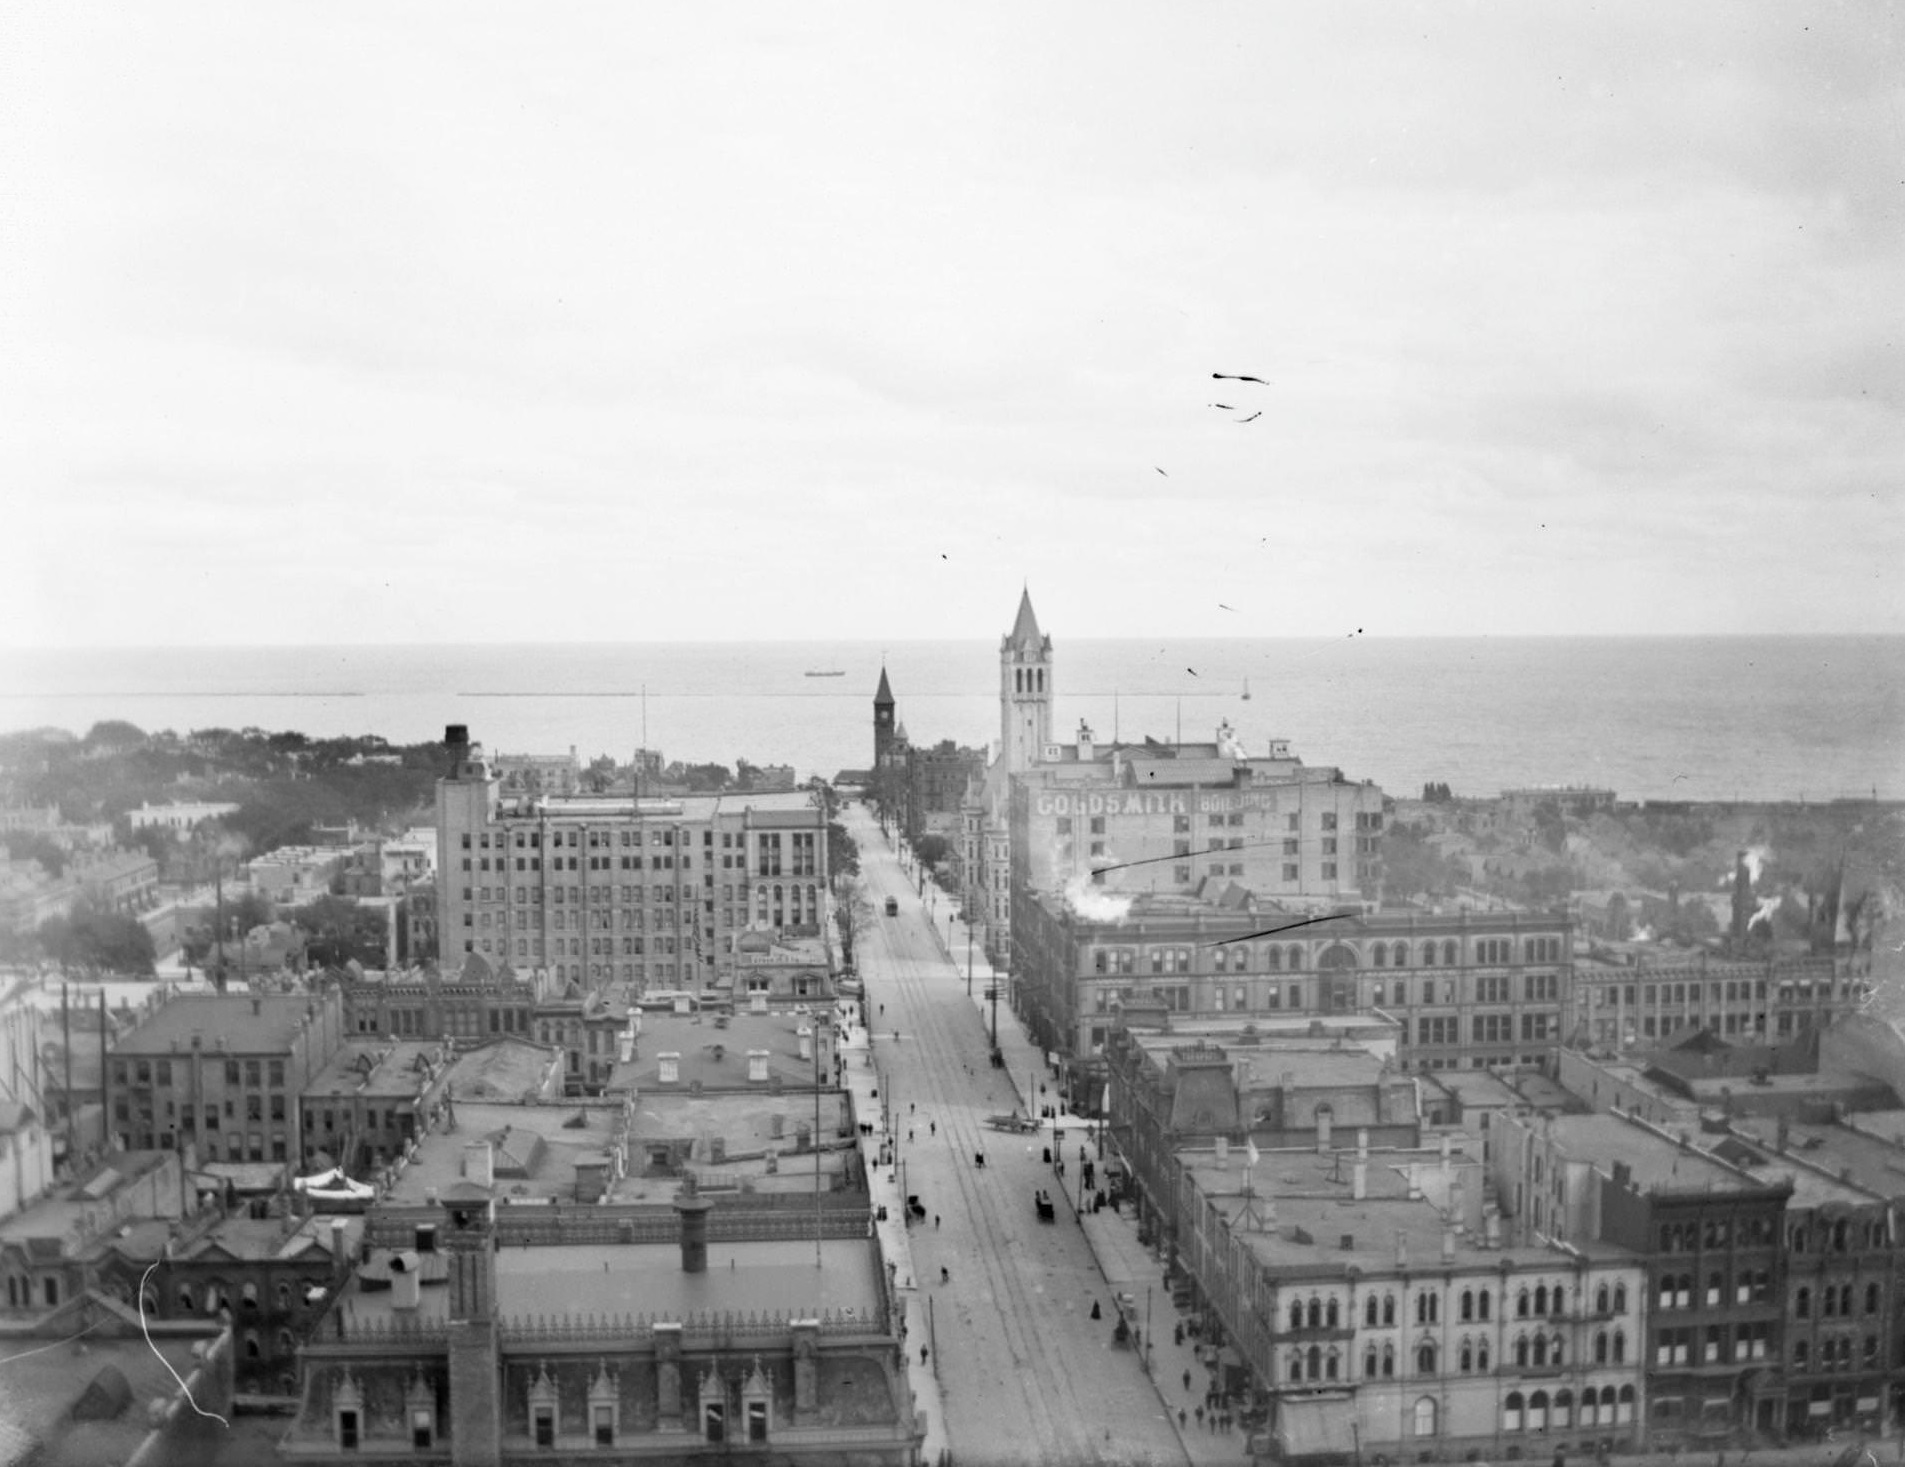 Elevated view from the top of the Pabst Building down East Wisconsin Avenue all the way to Milwaukee Bay and out to the horizon of Lake Michigan, Milwaukee, Wisconsin, 1898.